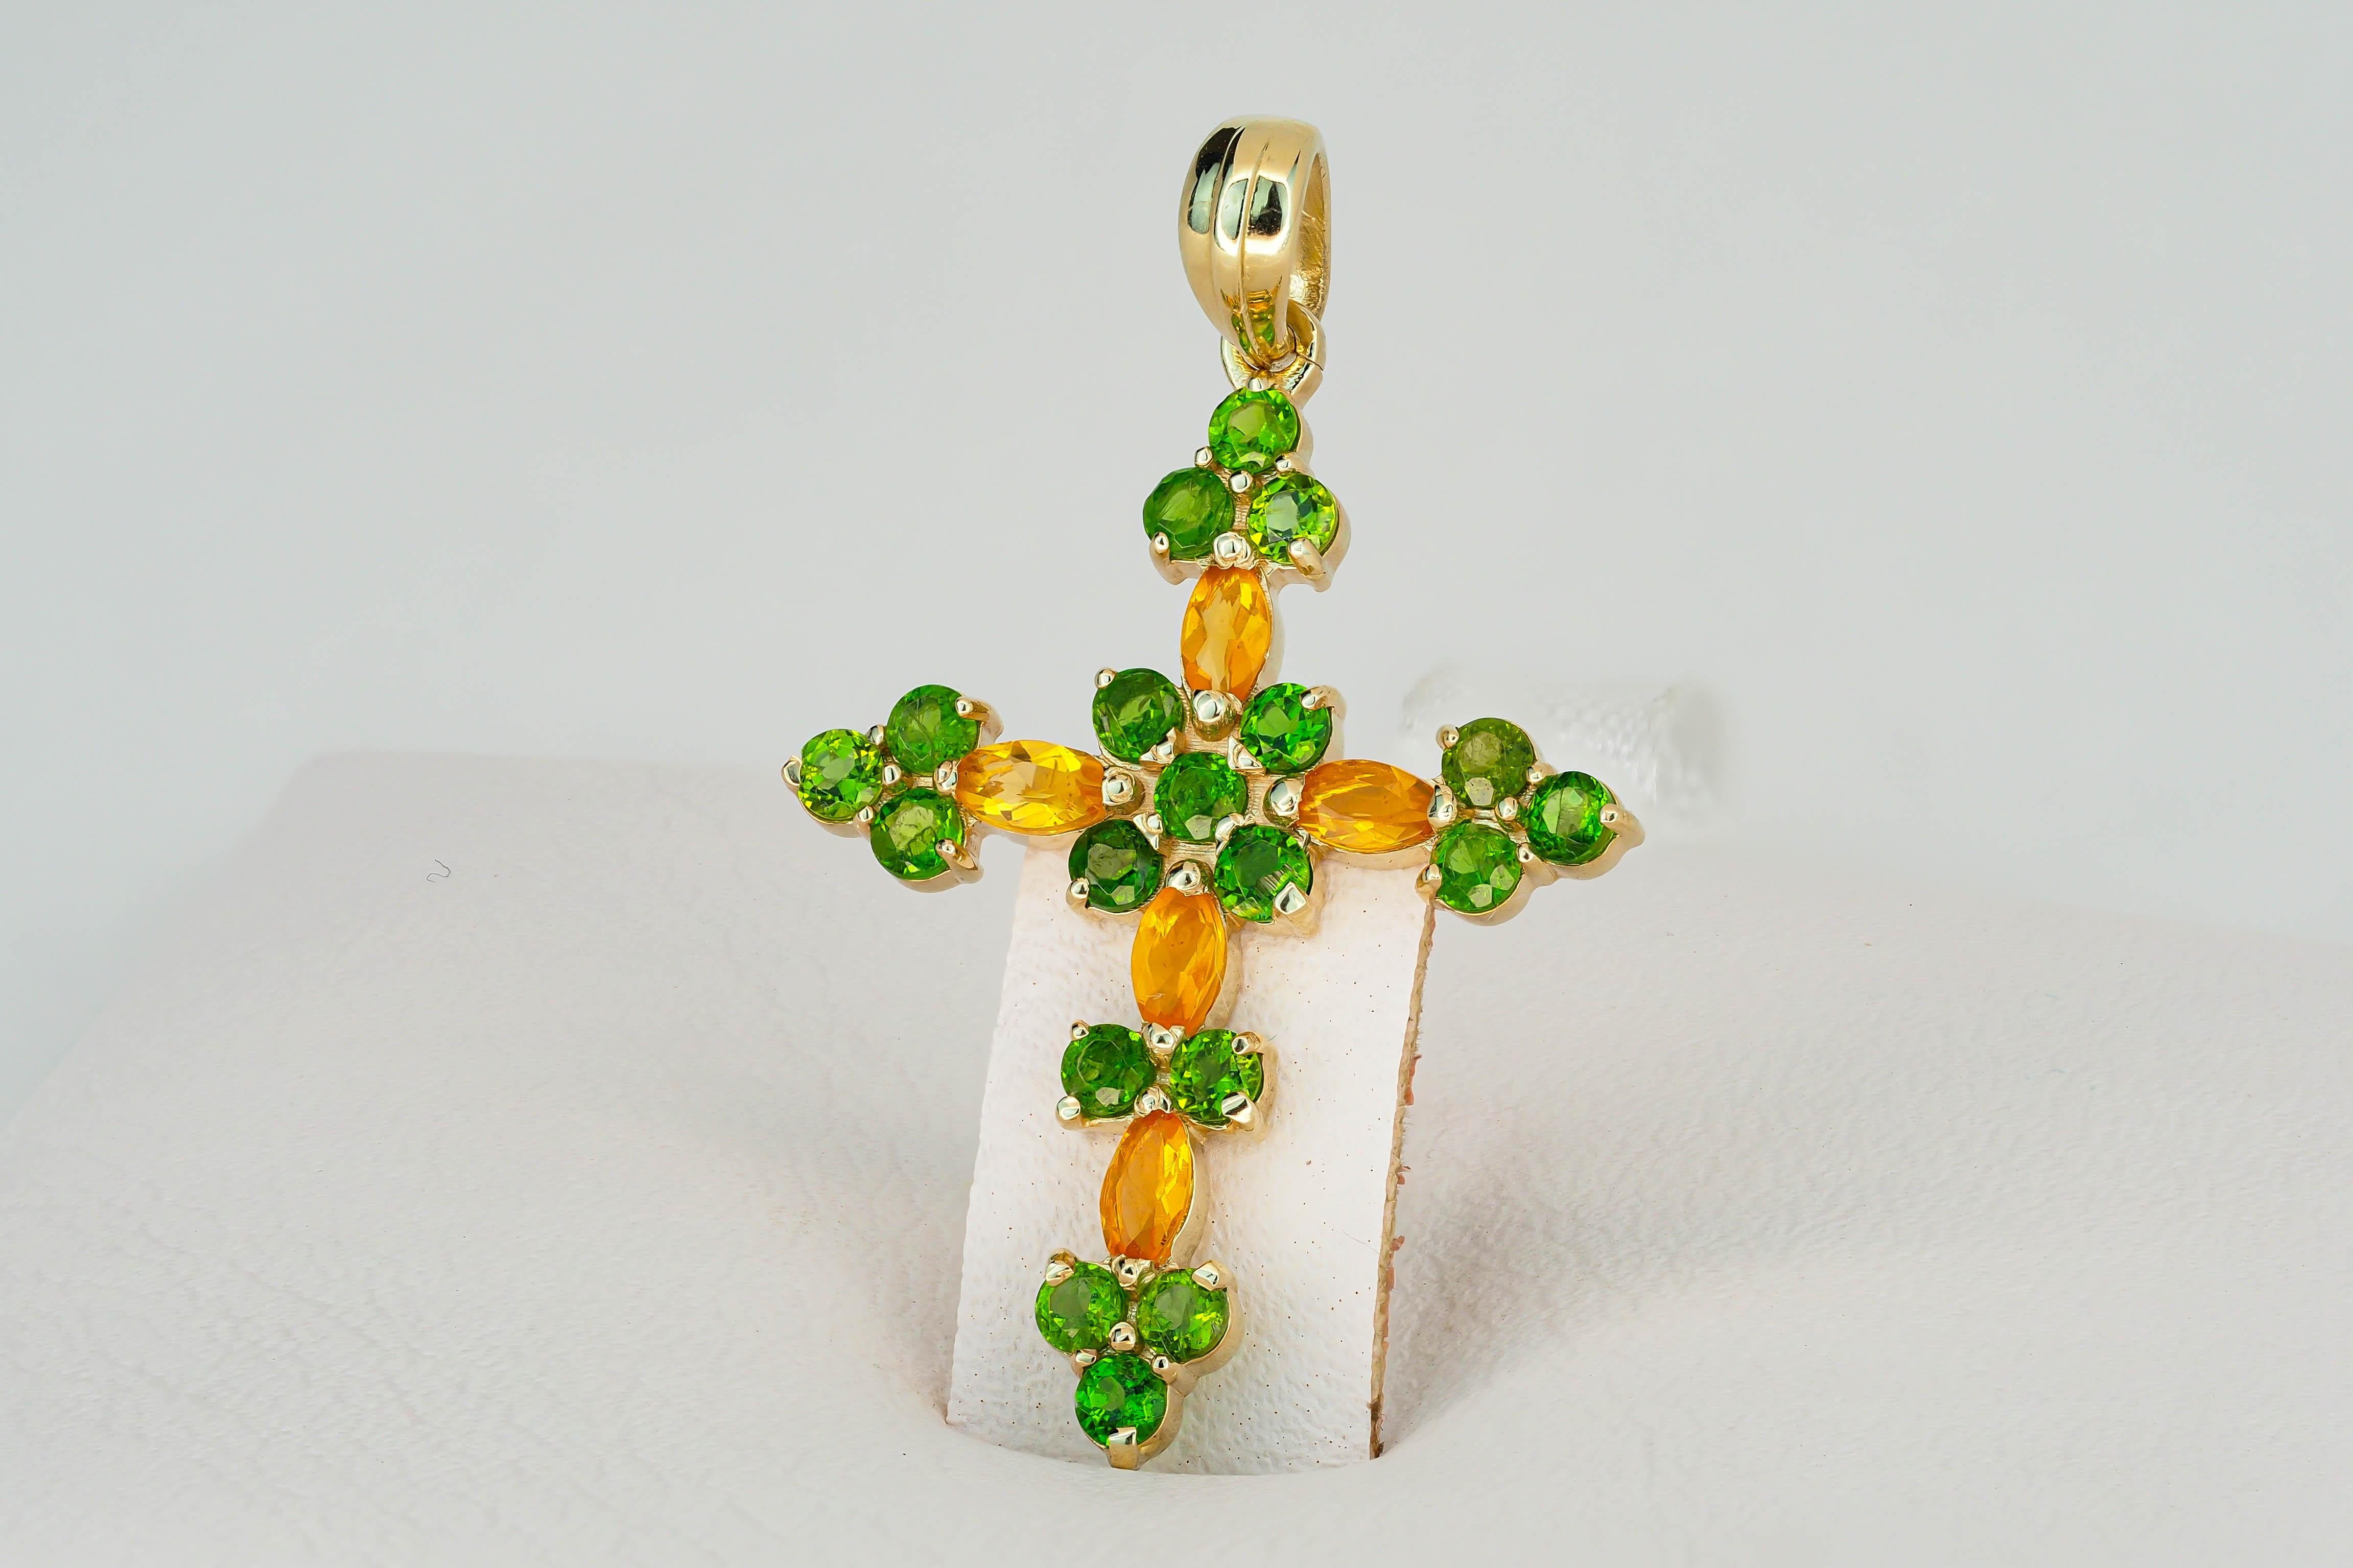 Women's 14k Gold Cross Pendant with Colored Stones Fire Opals and Tsavorites For Sale